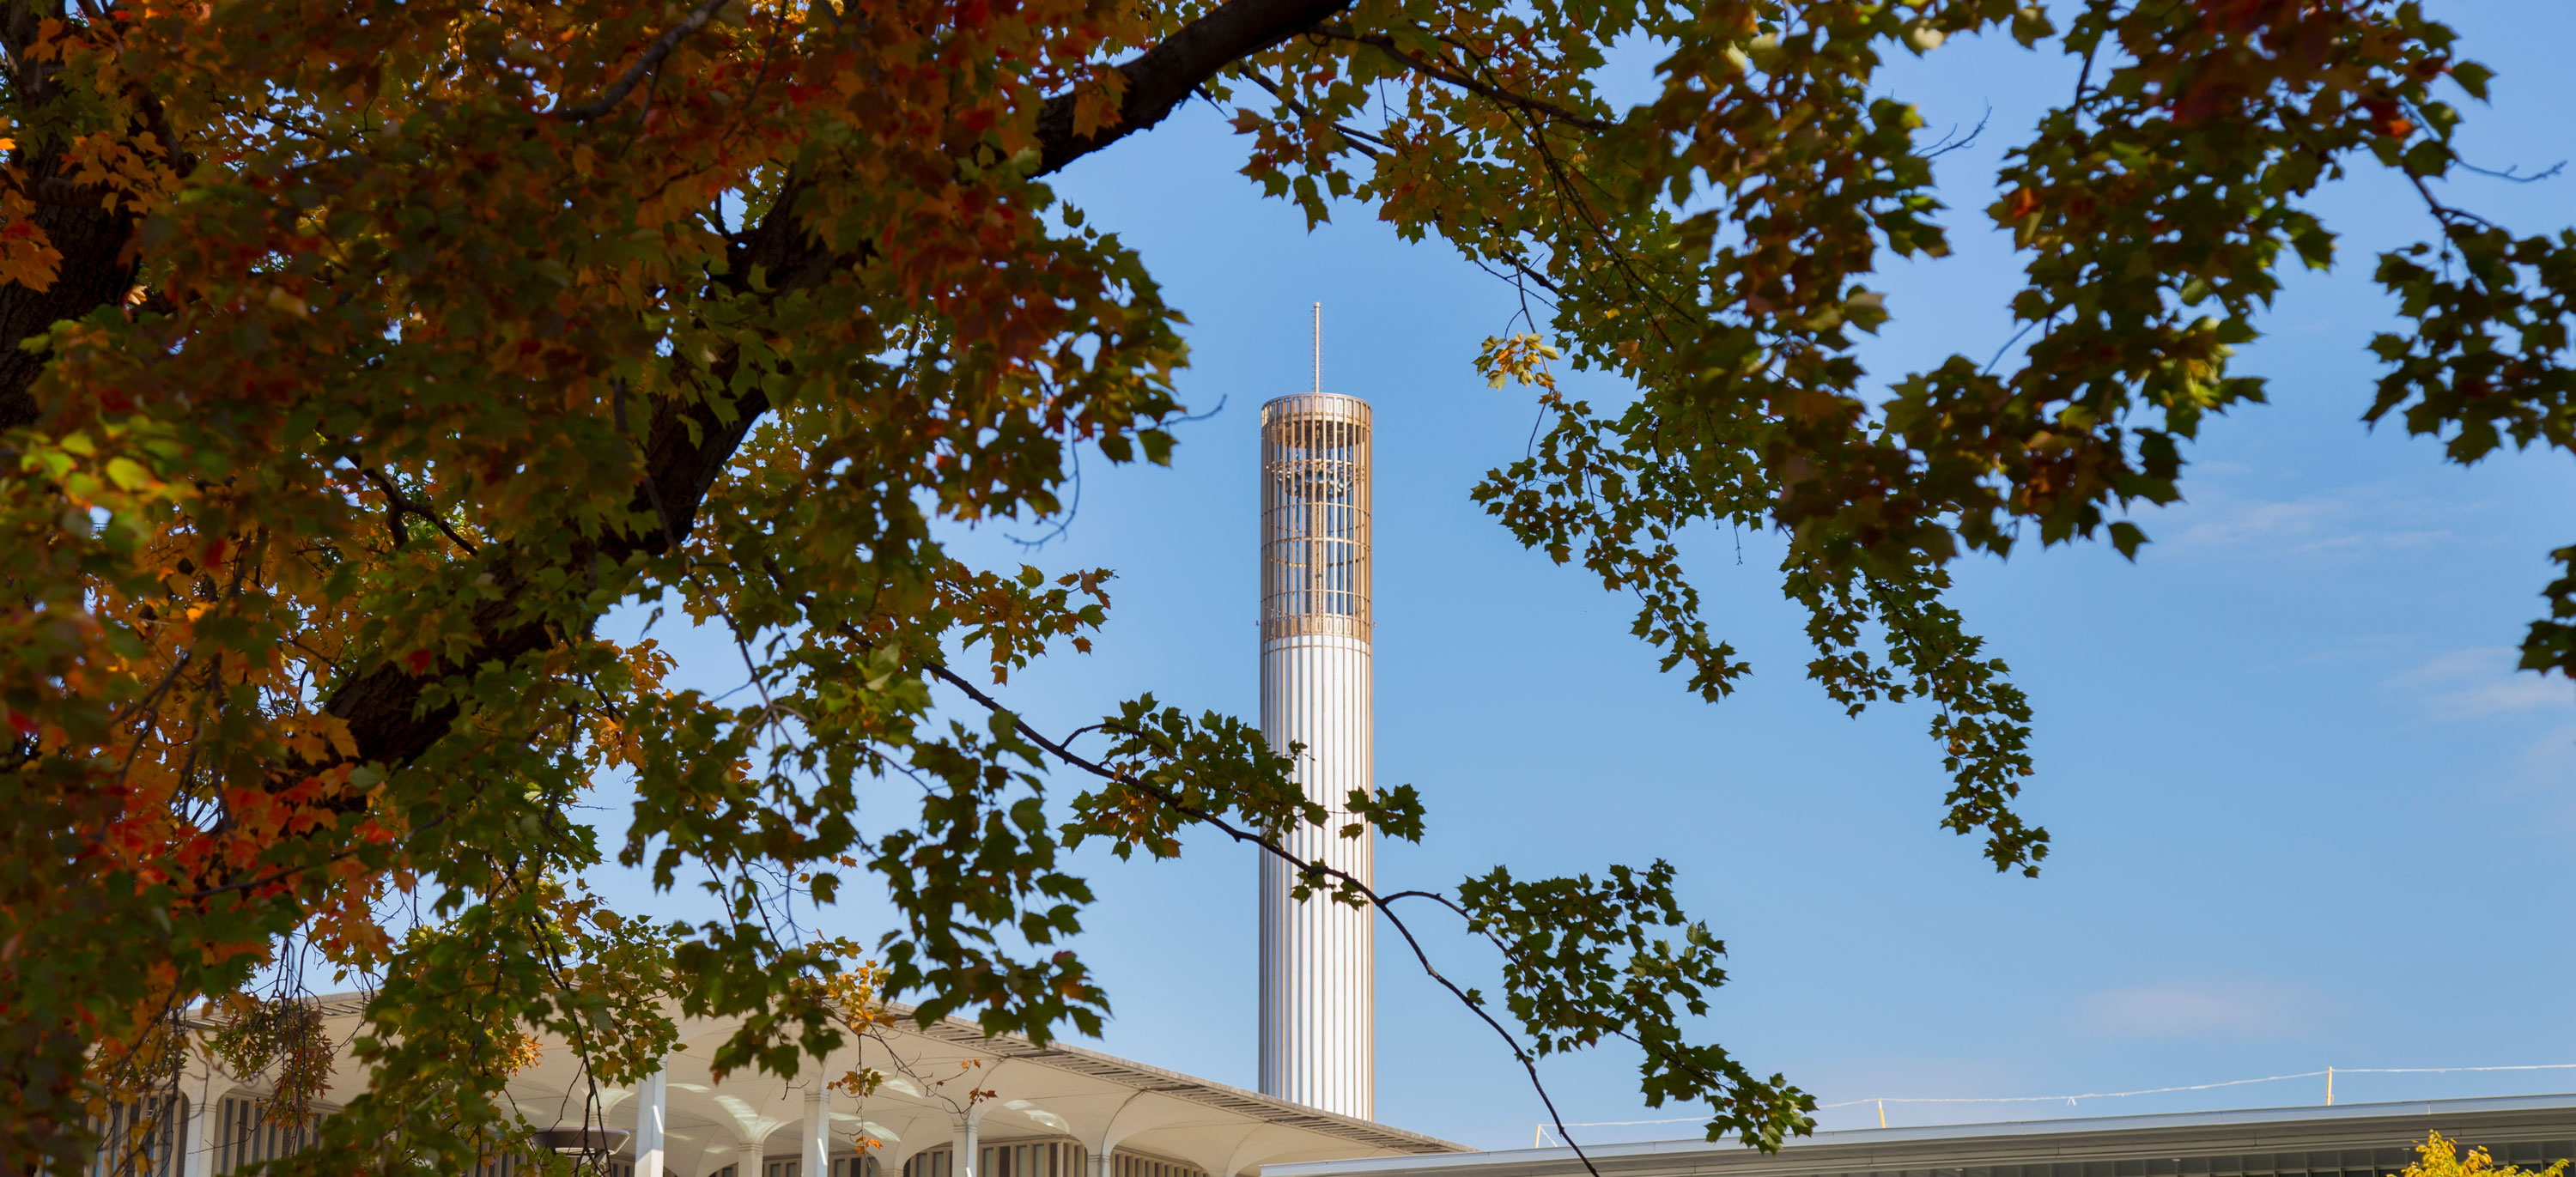 The UAlbany carillon, as seen through fall foliage on the Uptown Campus.